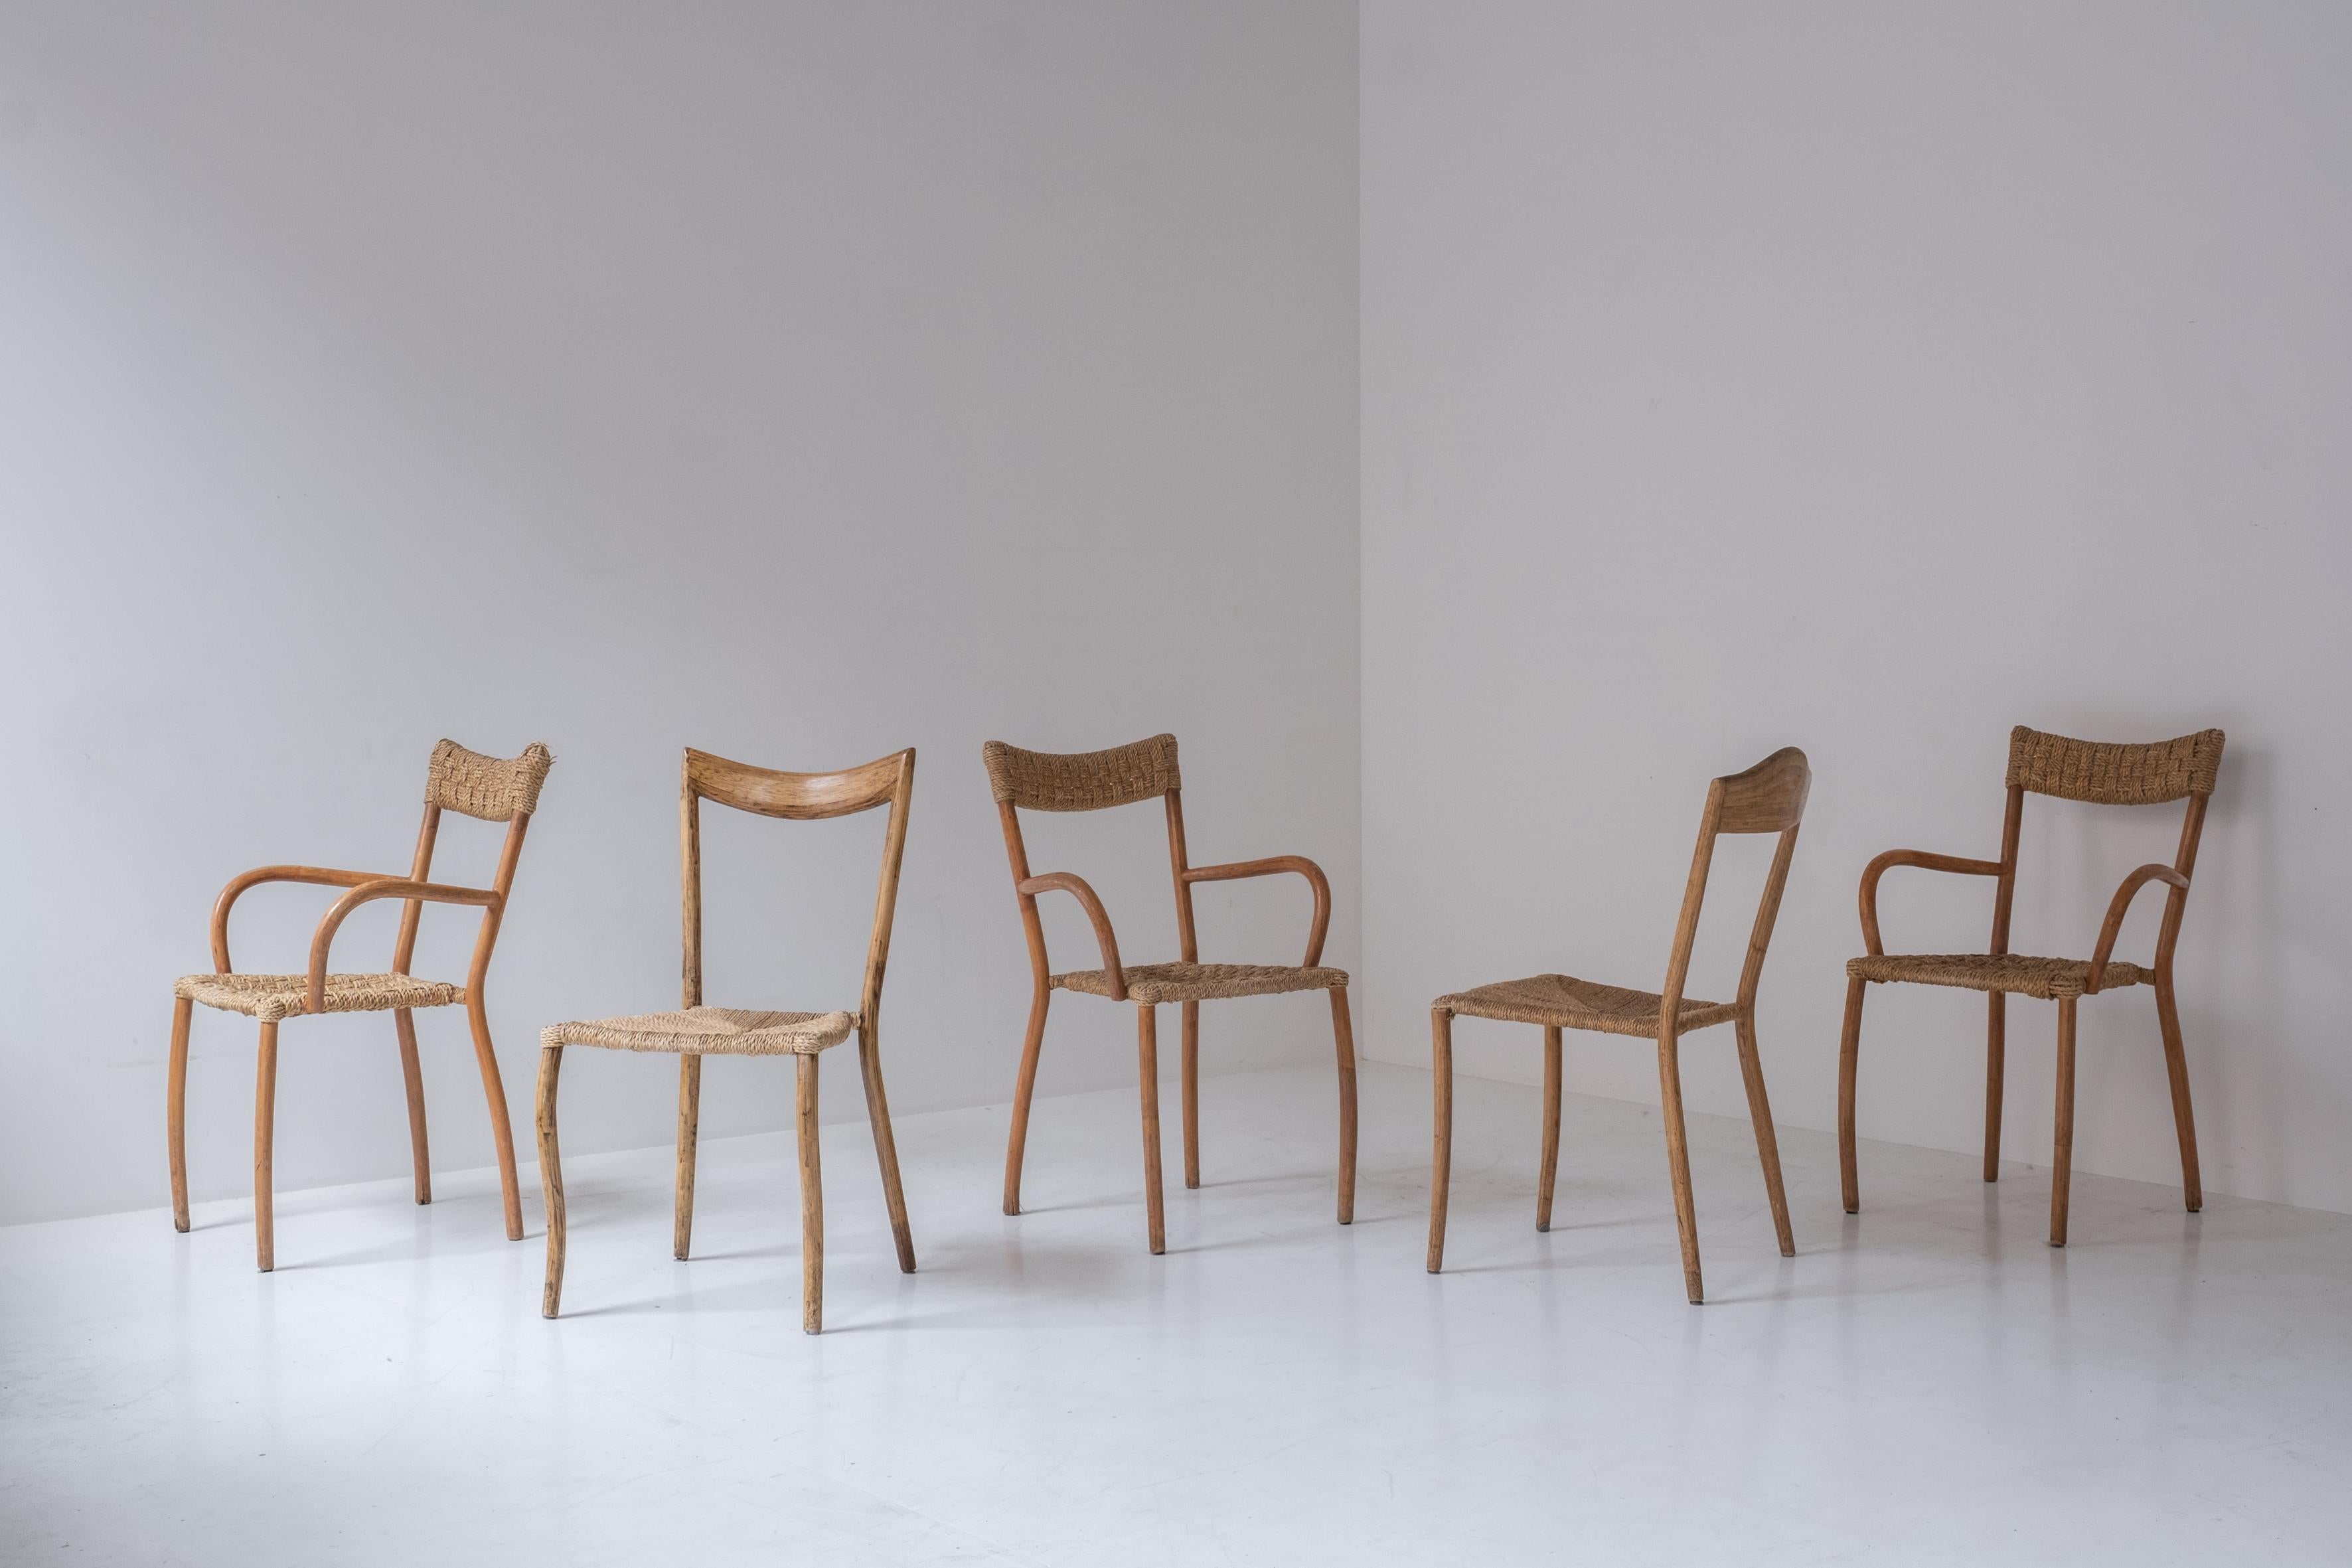 Set of 5 sculptural dining chairs from France, designed in the 1960s. These chairs have paper cord seats and are slightly different from each other. Some age related marks, but overall in a good vintage condition